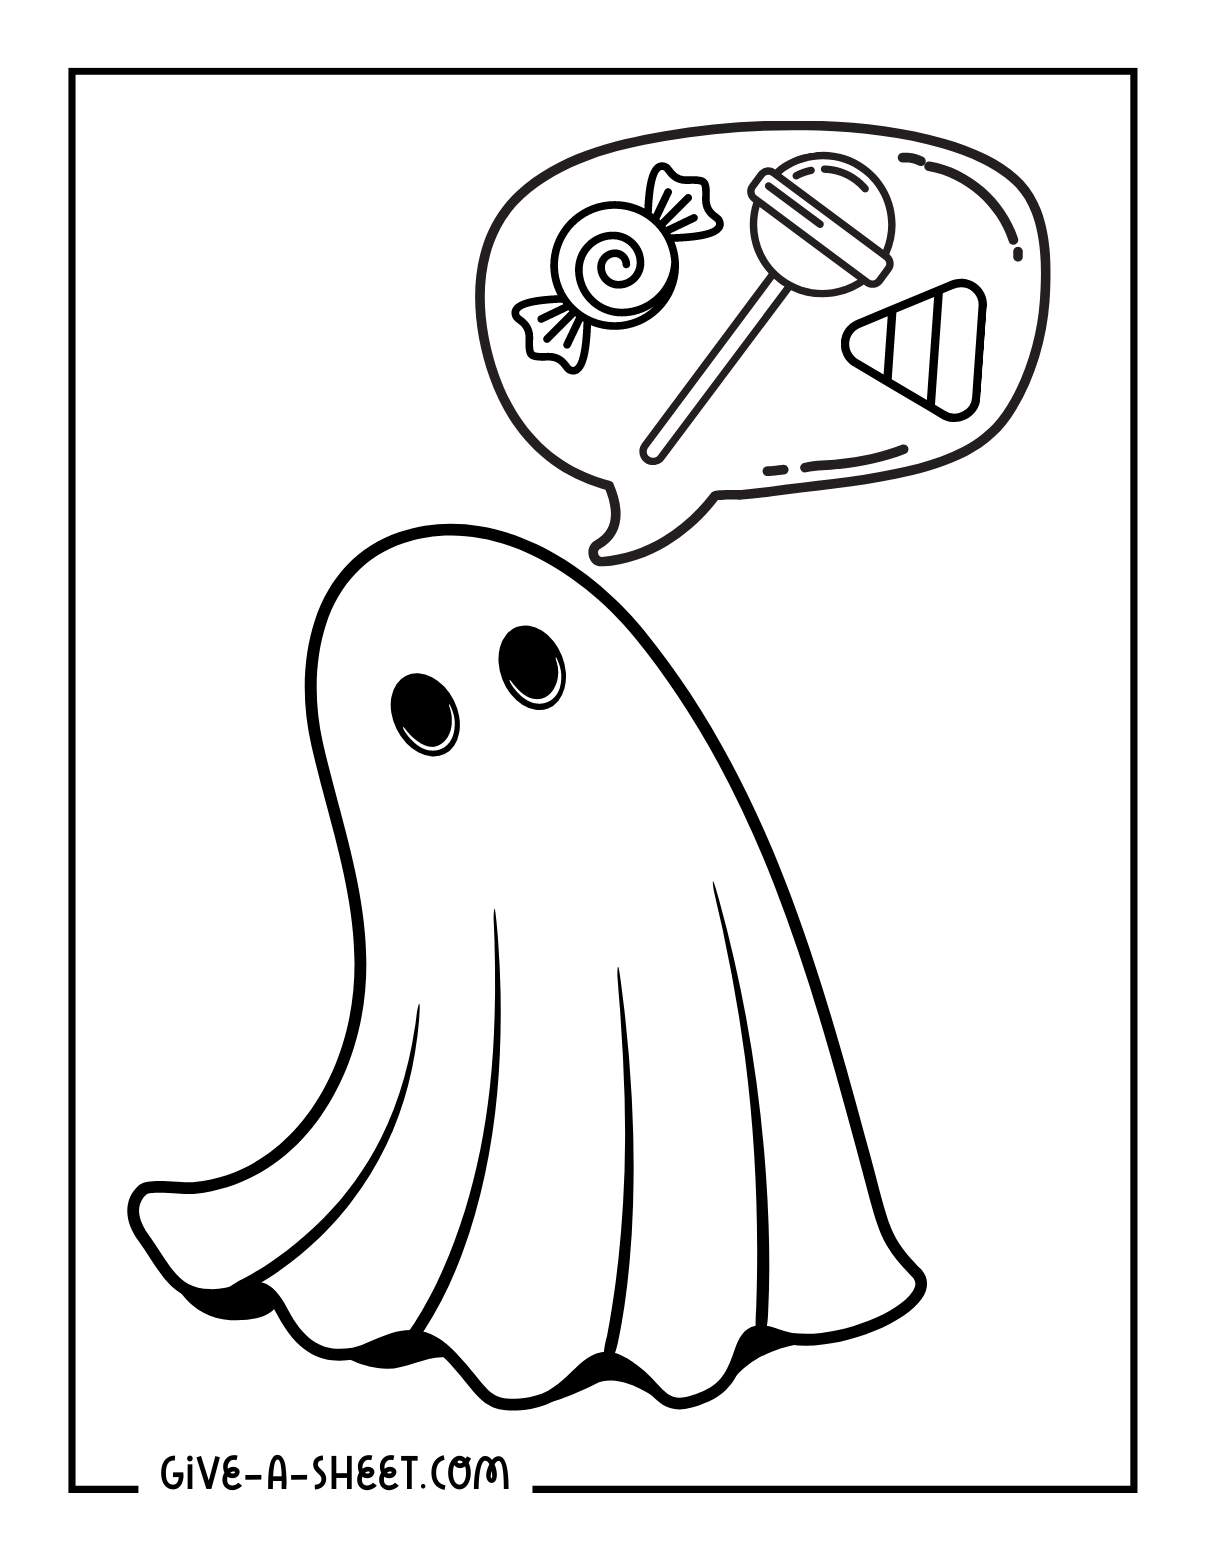 Halloween ghost trick or treat candy ghost coloring pages.